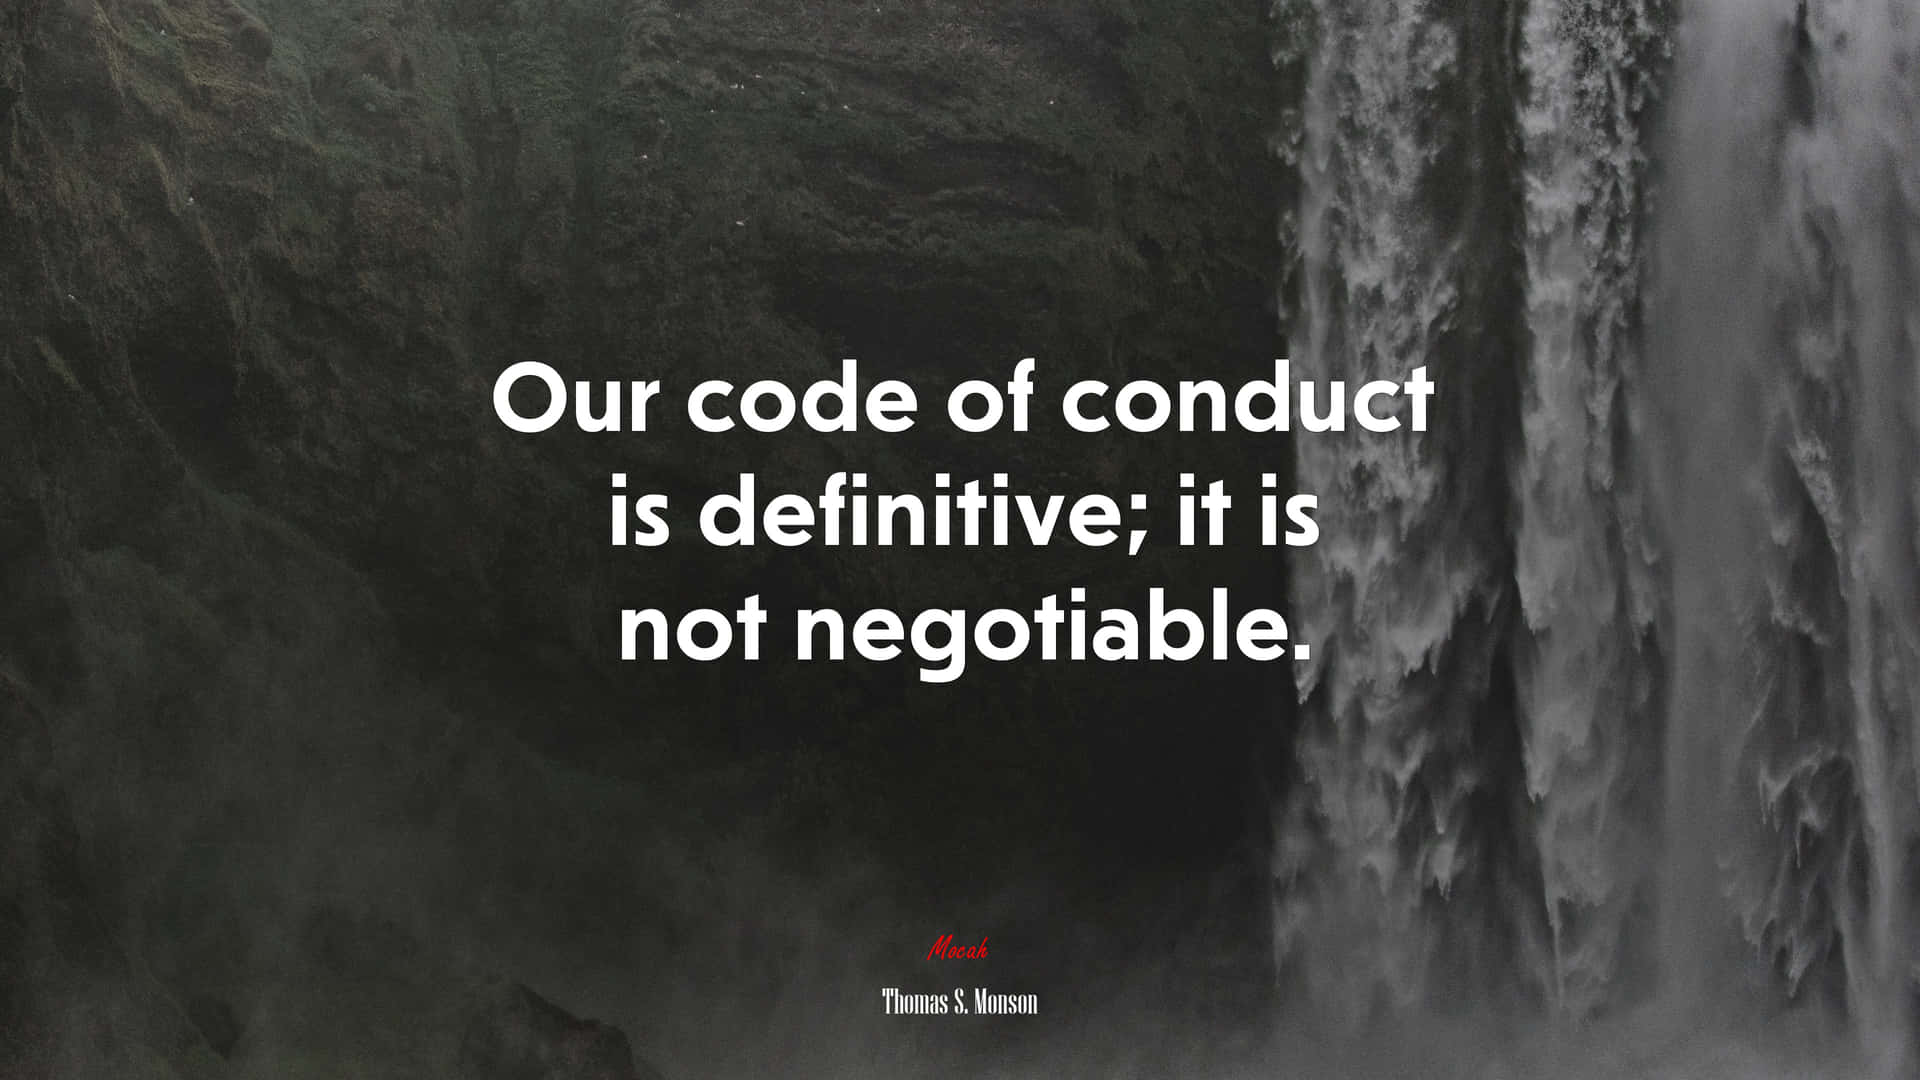 Our Code Of Conduct Is Not Negotiable Wallpaper